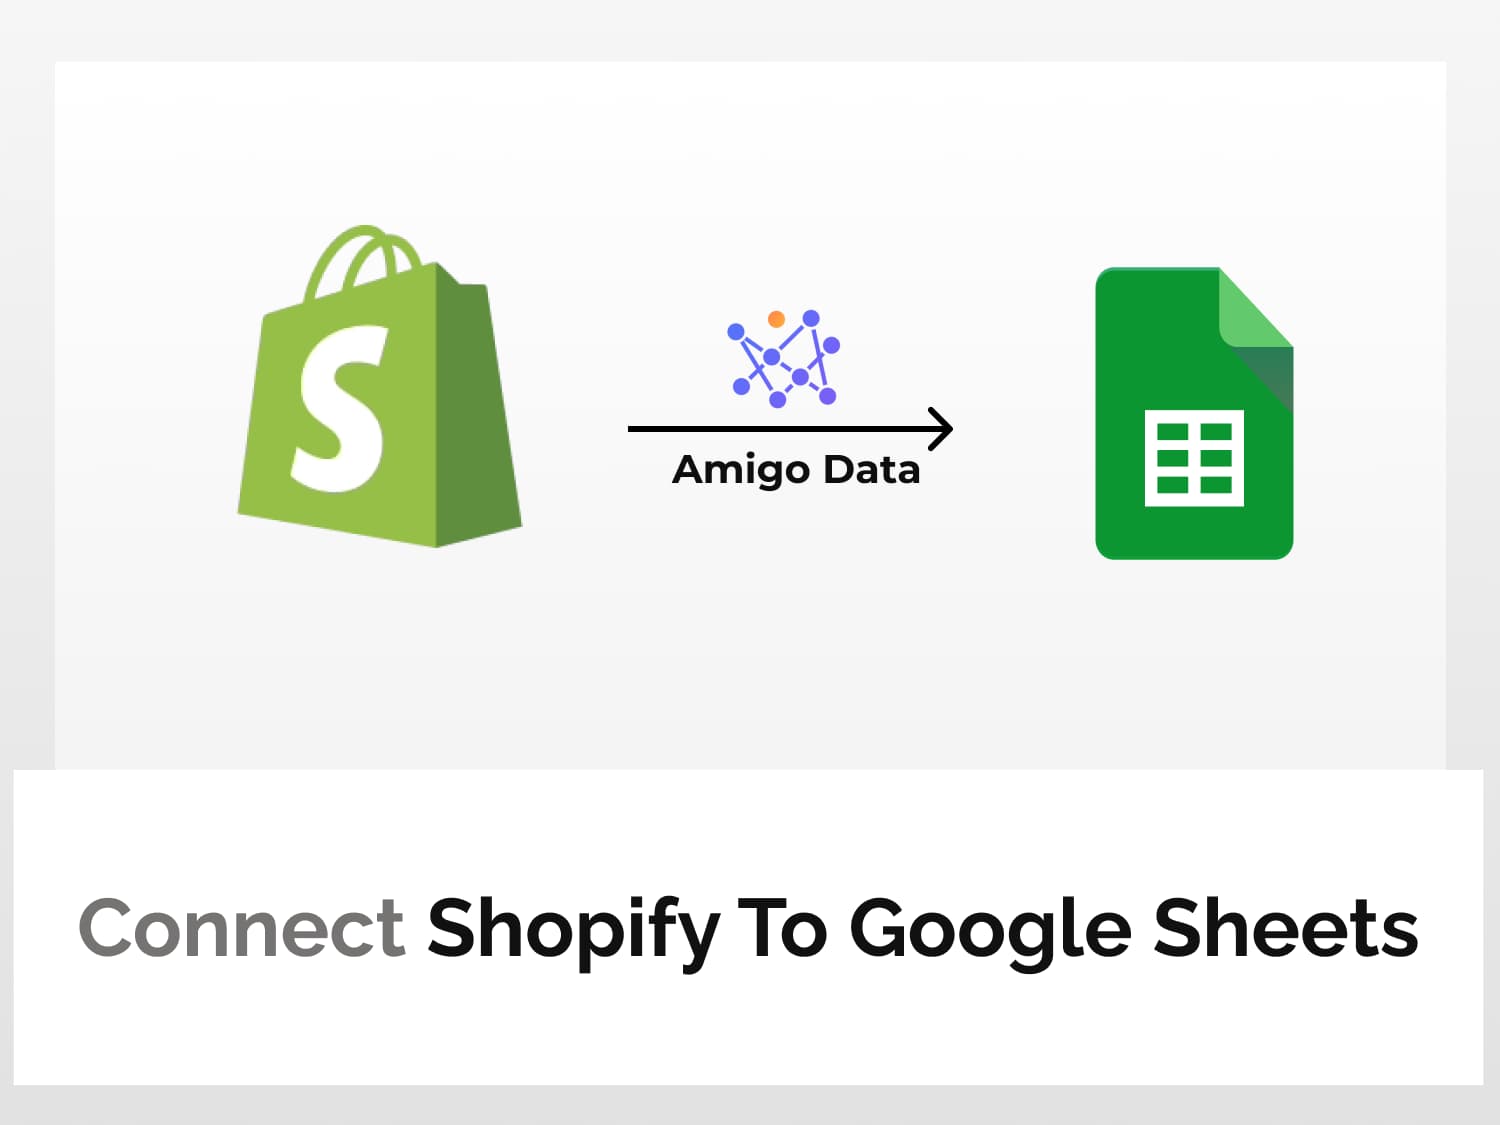 How to connect Shopify to Google Sheets and automate data exports